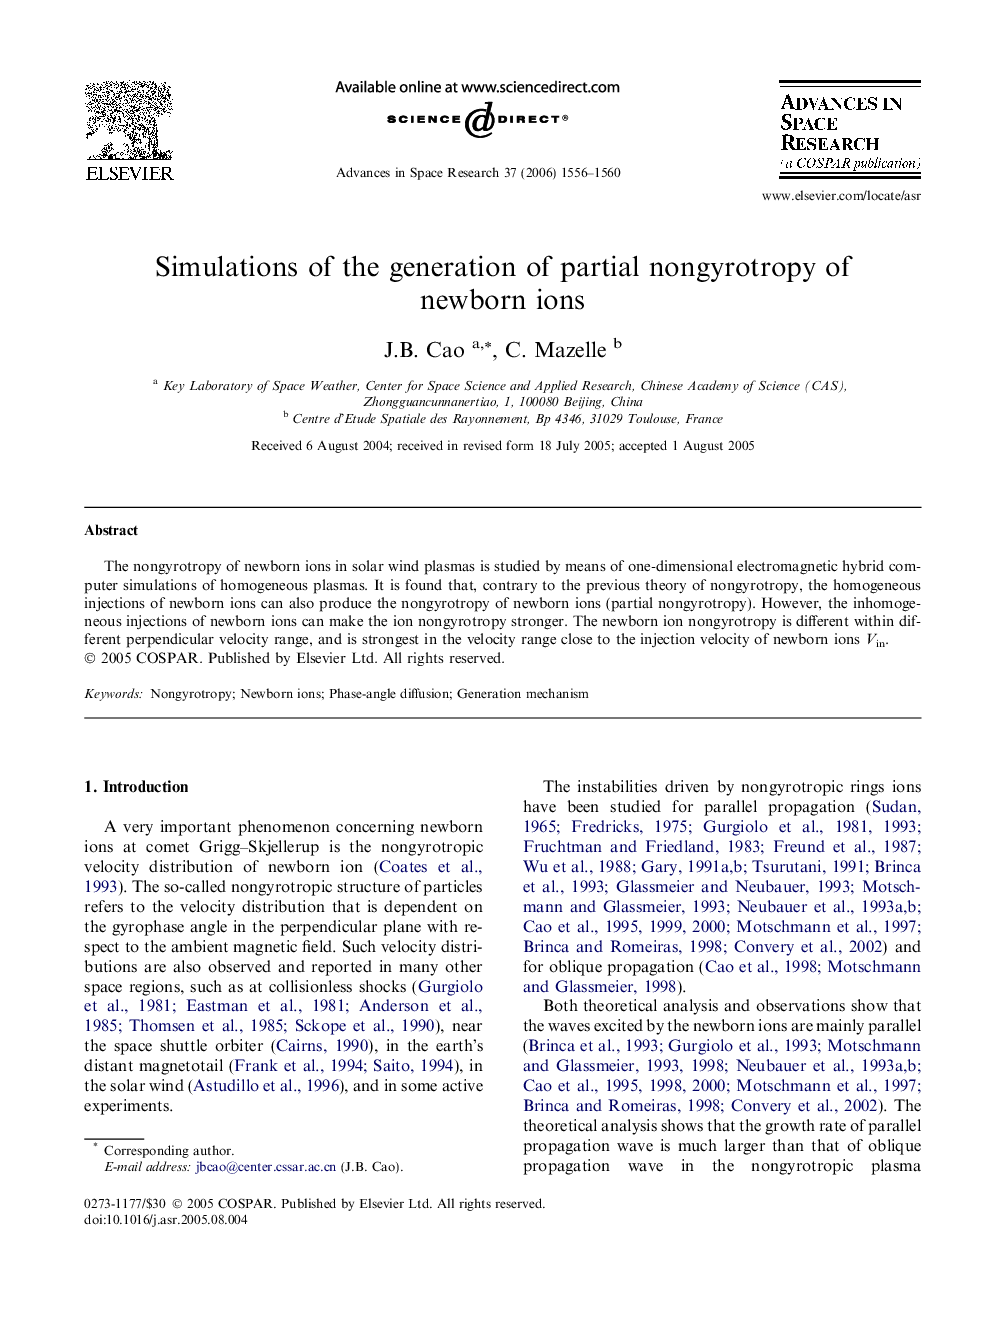 Simulations of the generation of partial nongyrotropy of newborn ions